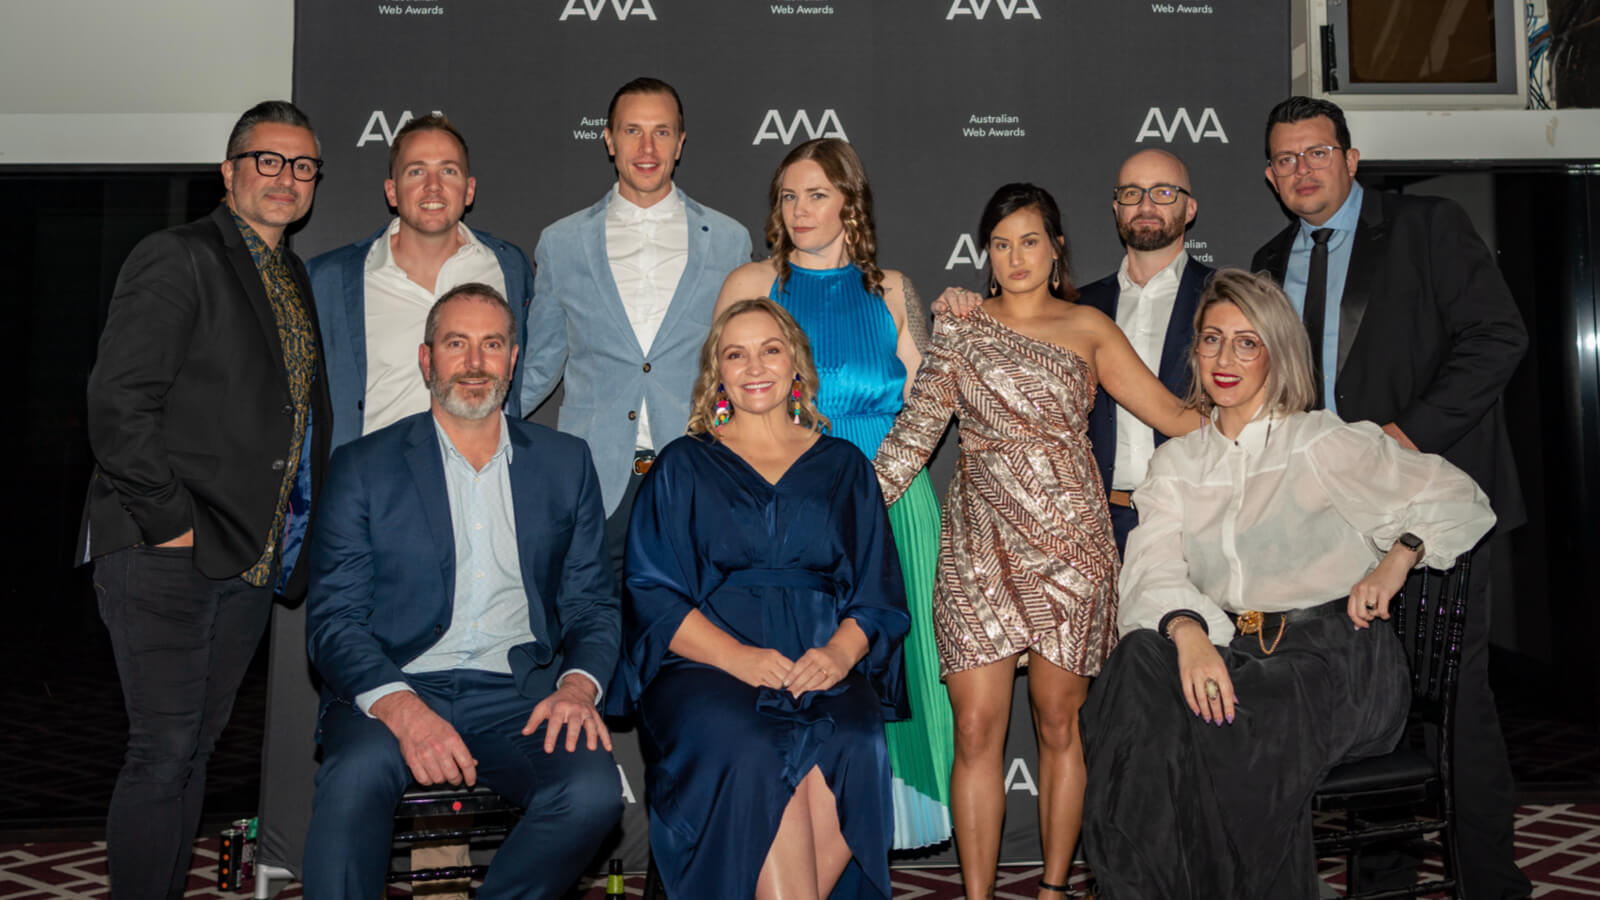 The 10 members of the AWIA board at an awards night